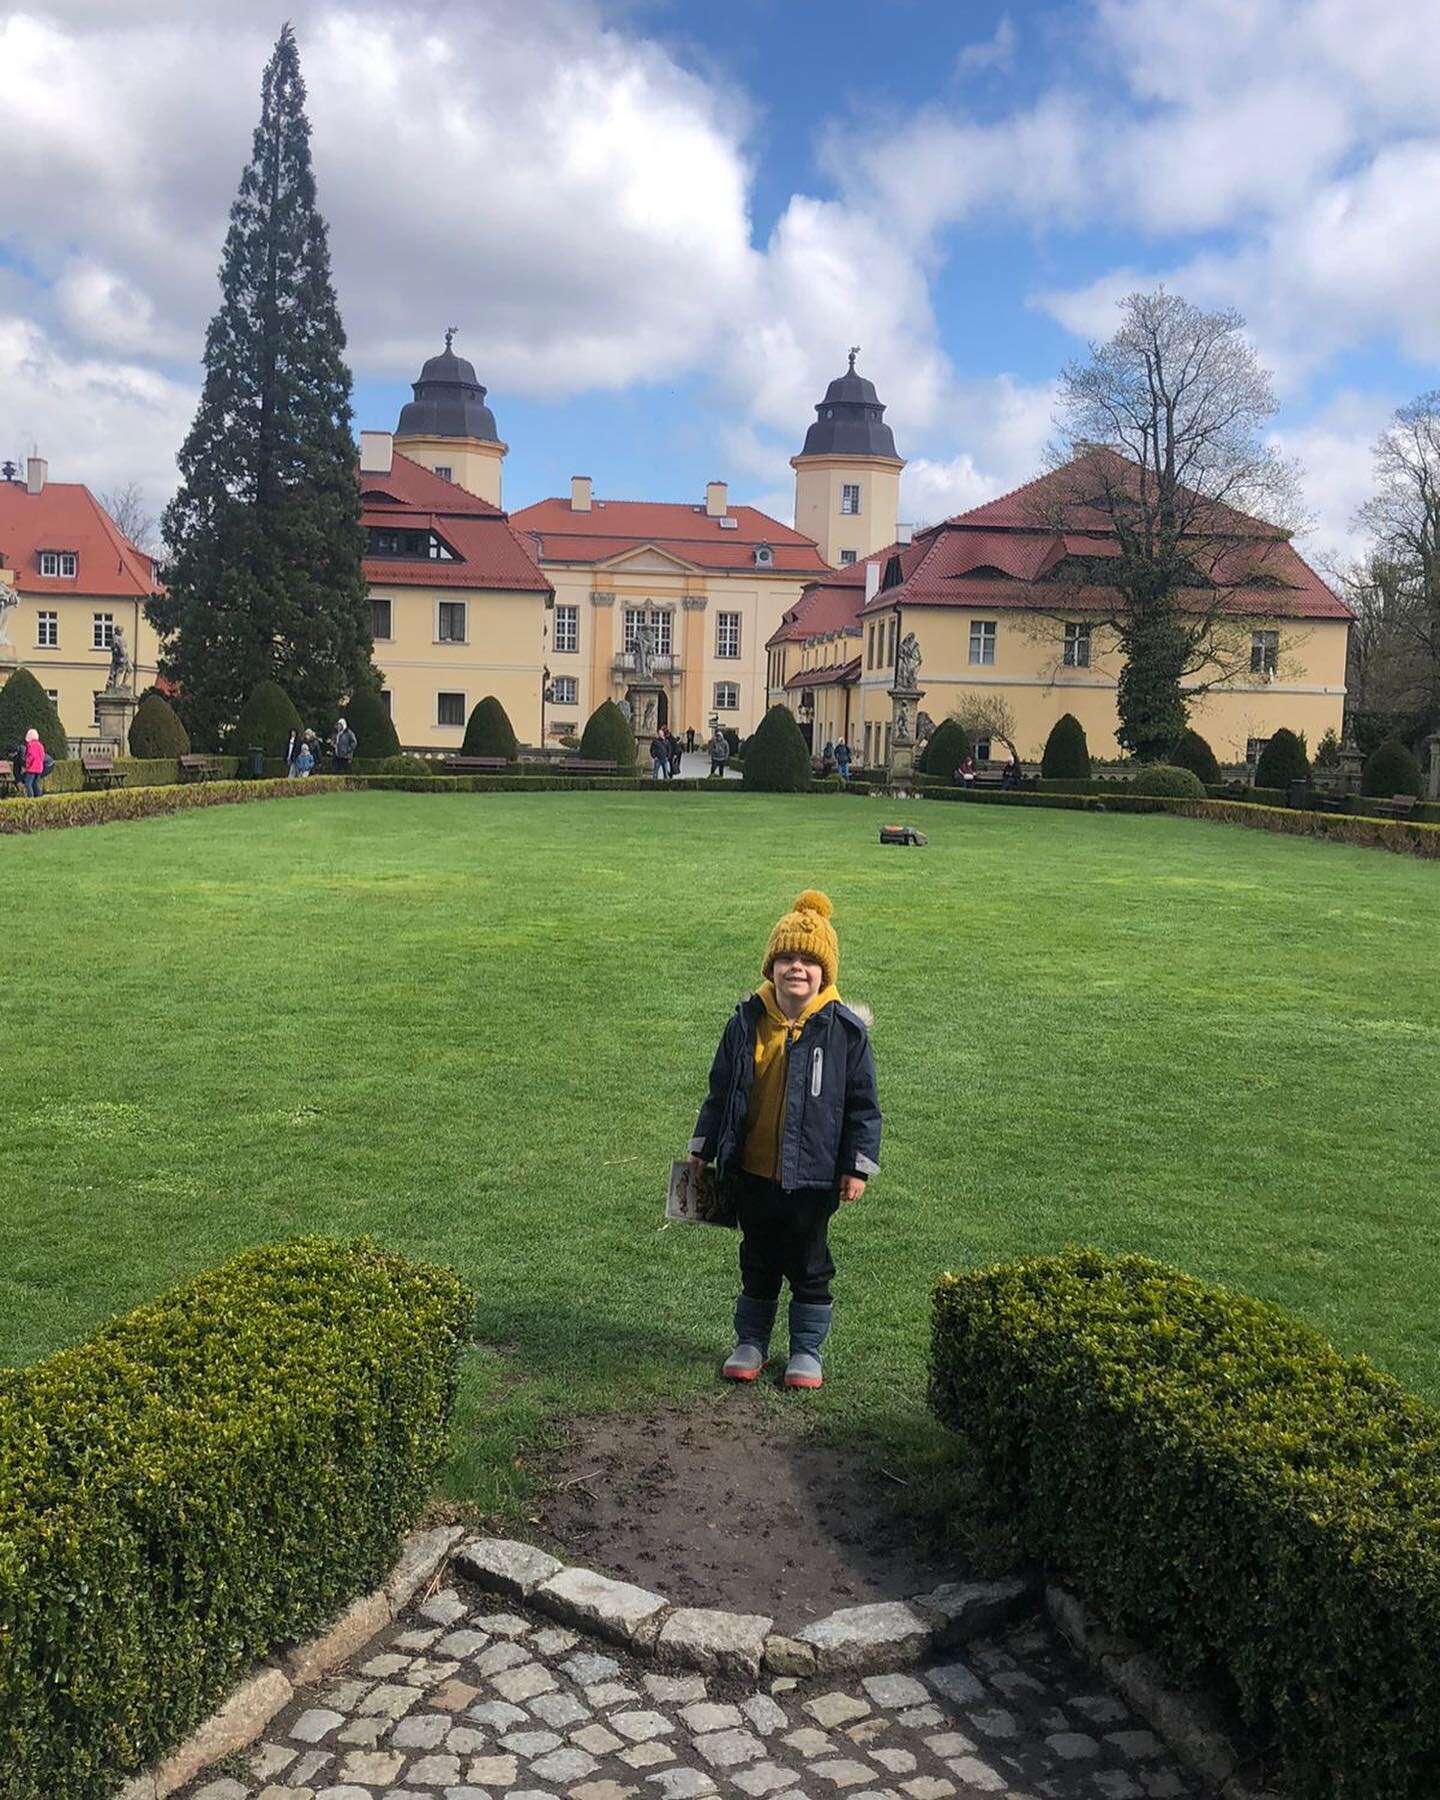 Maya and her boys have been exploring some beautiful and historic sights in Poland! They visited a very old church (swipe to see video!) and a castle. Follow the yellow hats to see the boys&rsquo; adventure. 

While they&rsquo;re trying to make the b